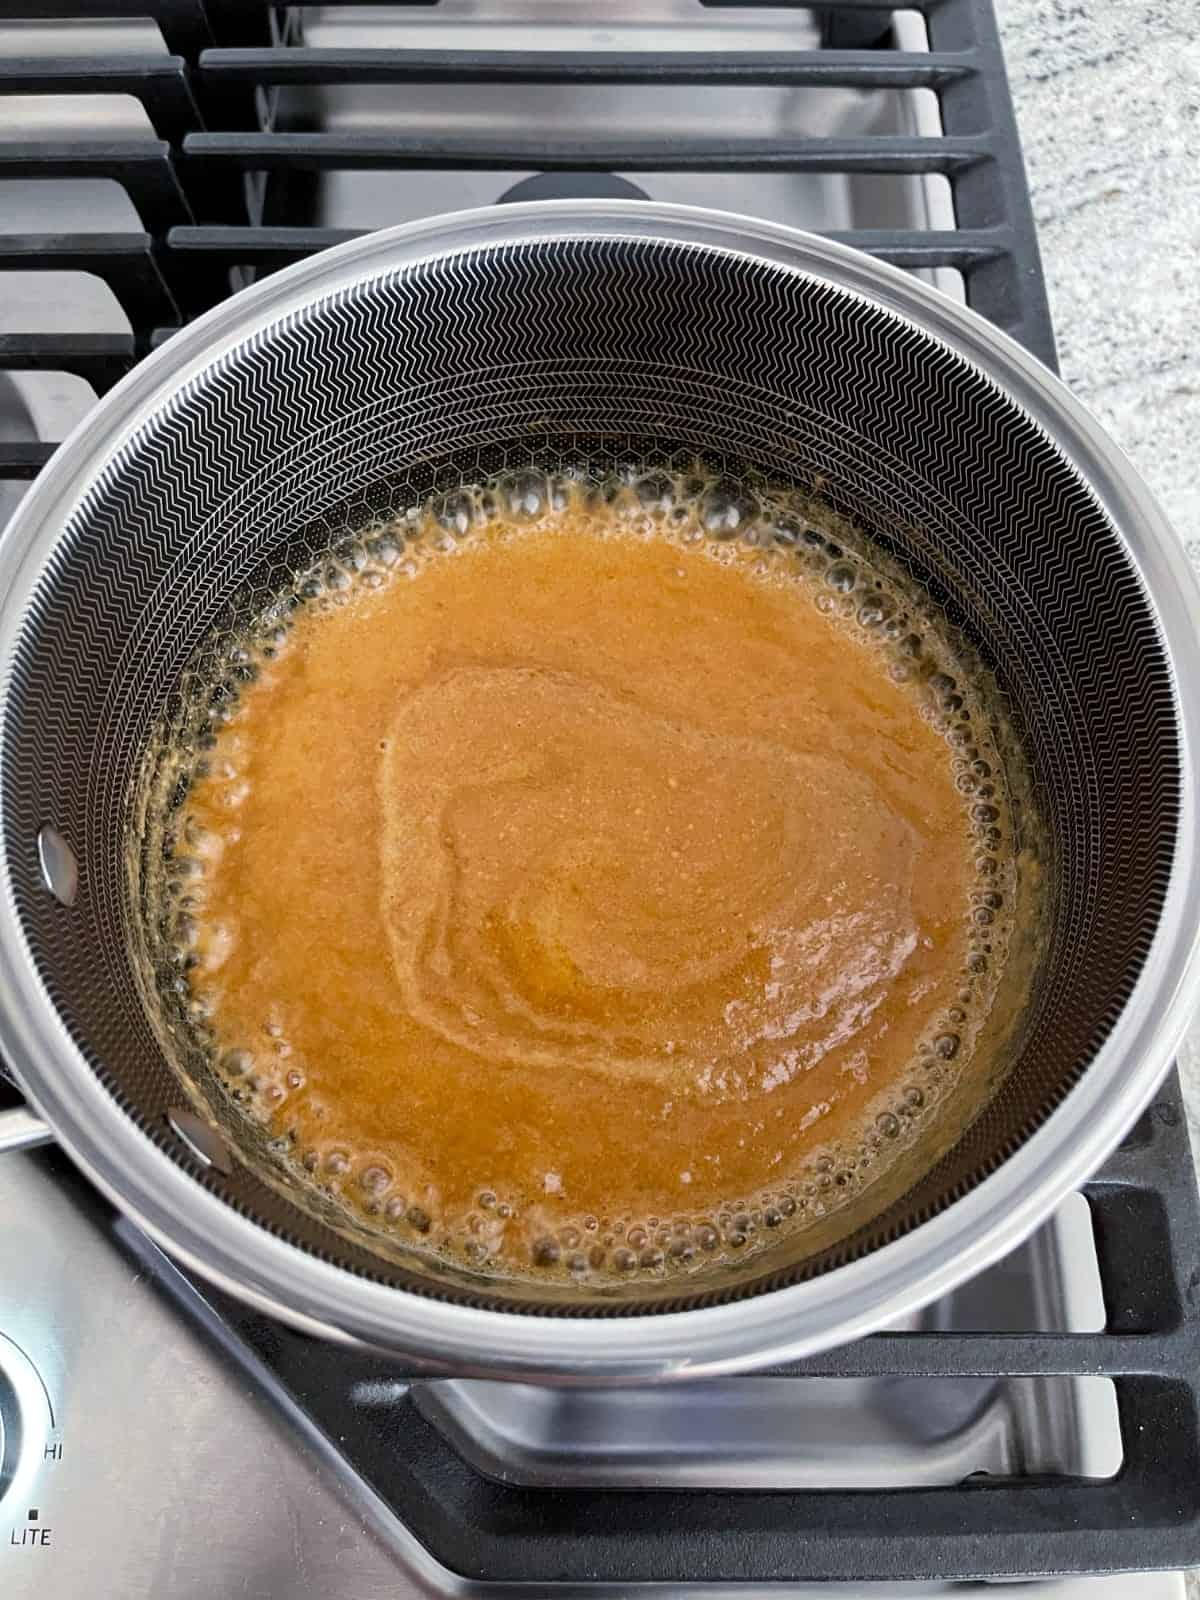 Boiling monk fruit sweetener, Truvia brown sugar, milk, butter and peanut butter in saucepan on stovetop.